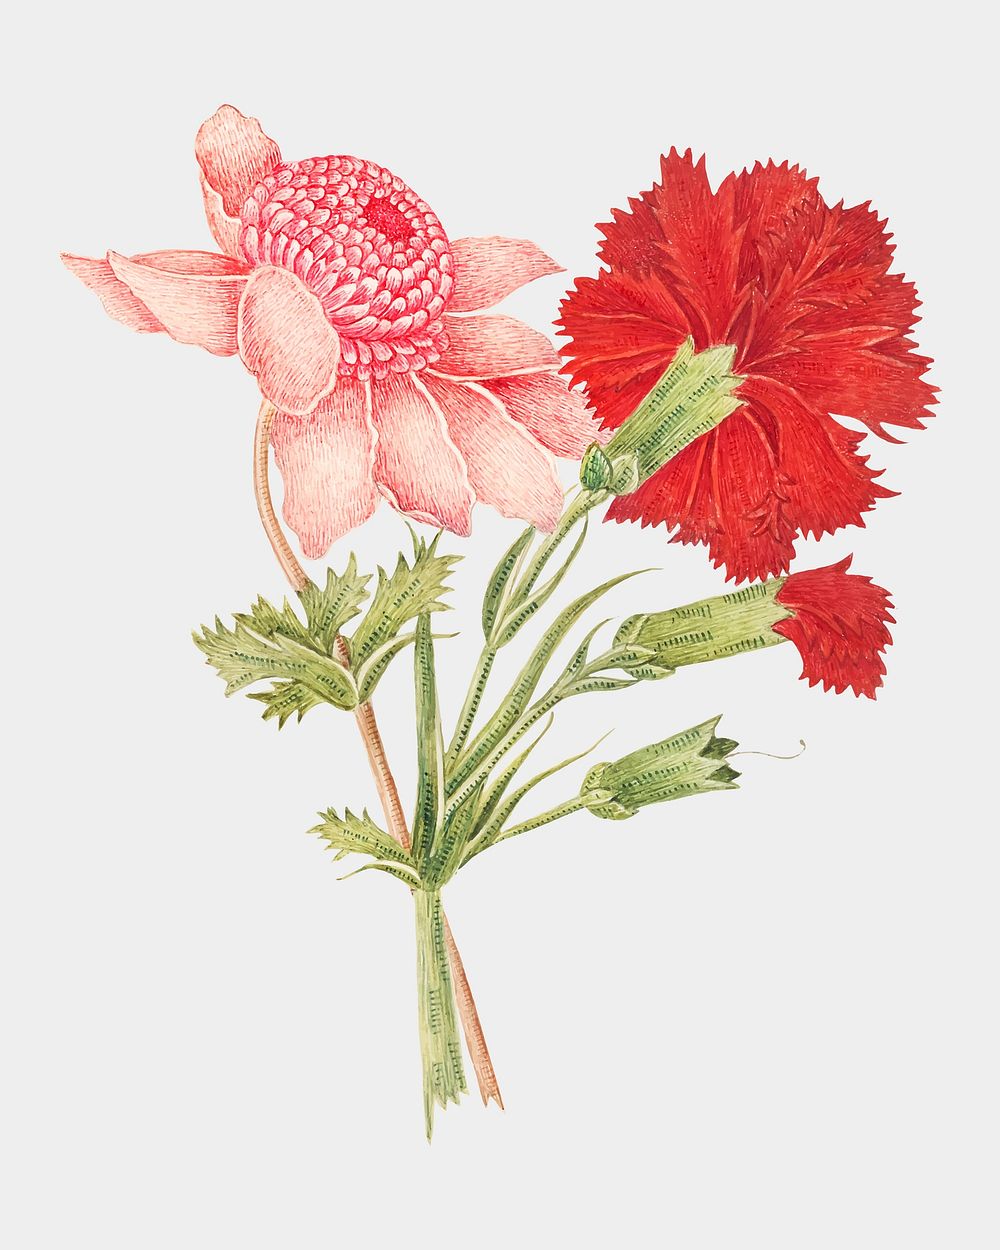 Vintage flowers vector illustration, remixed from the 18th-century artworks from the Smithsonian archive.